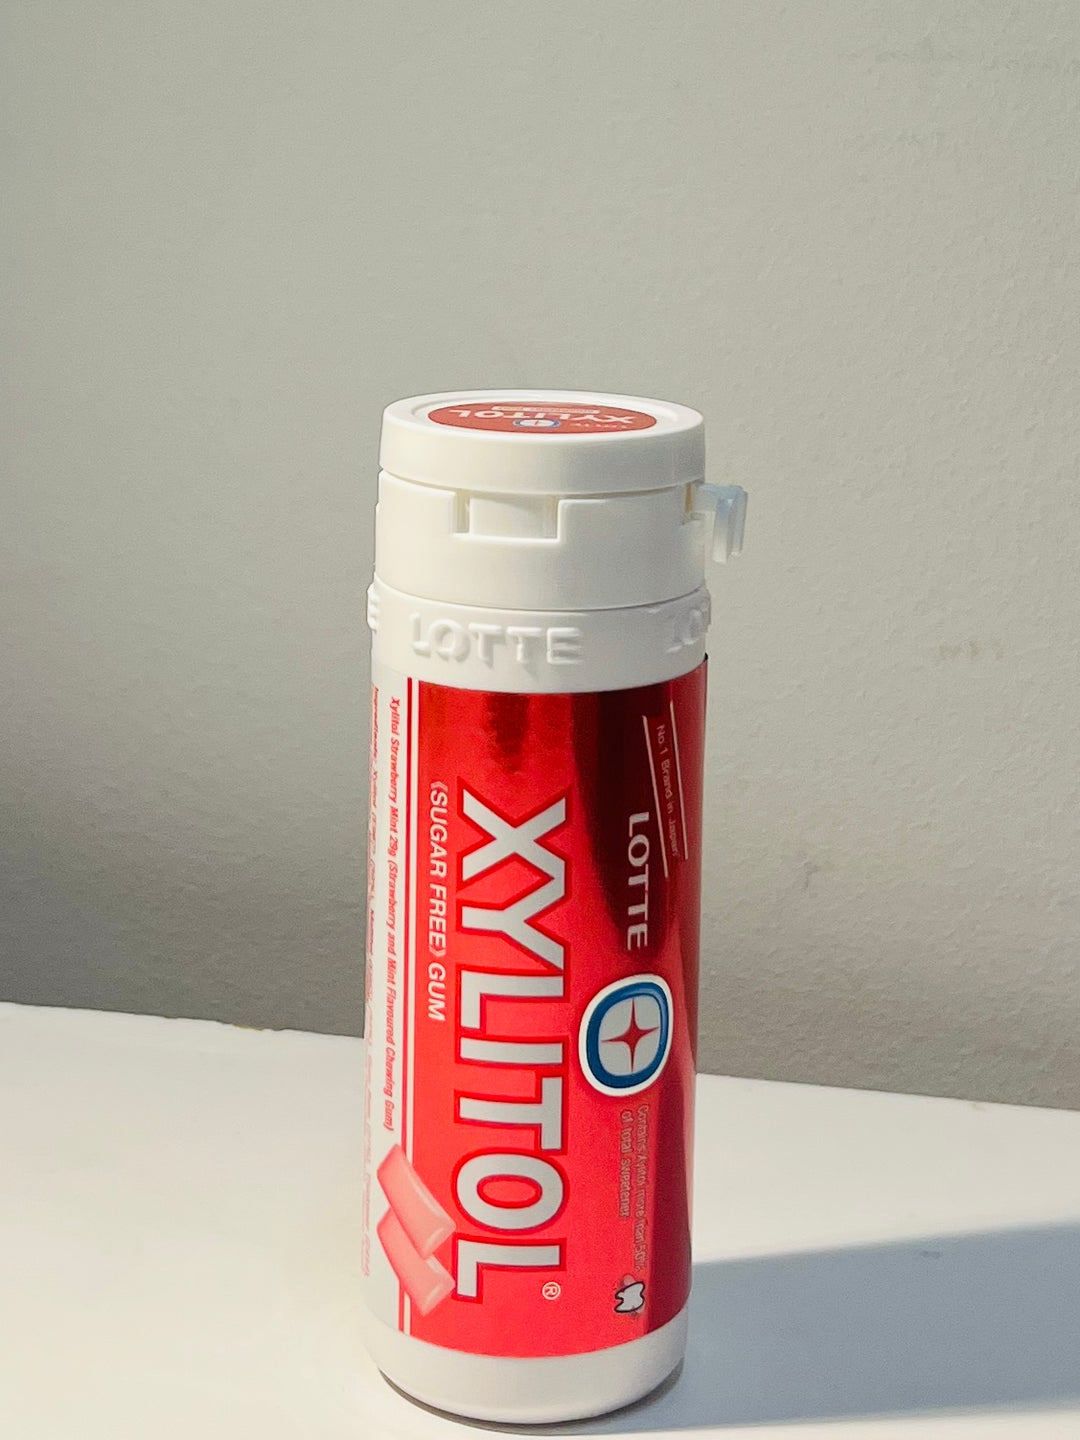 Lotte XYLITOL 29g